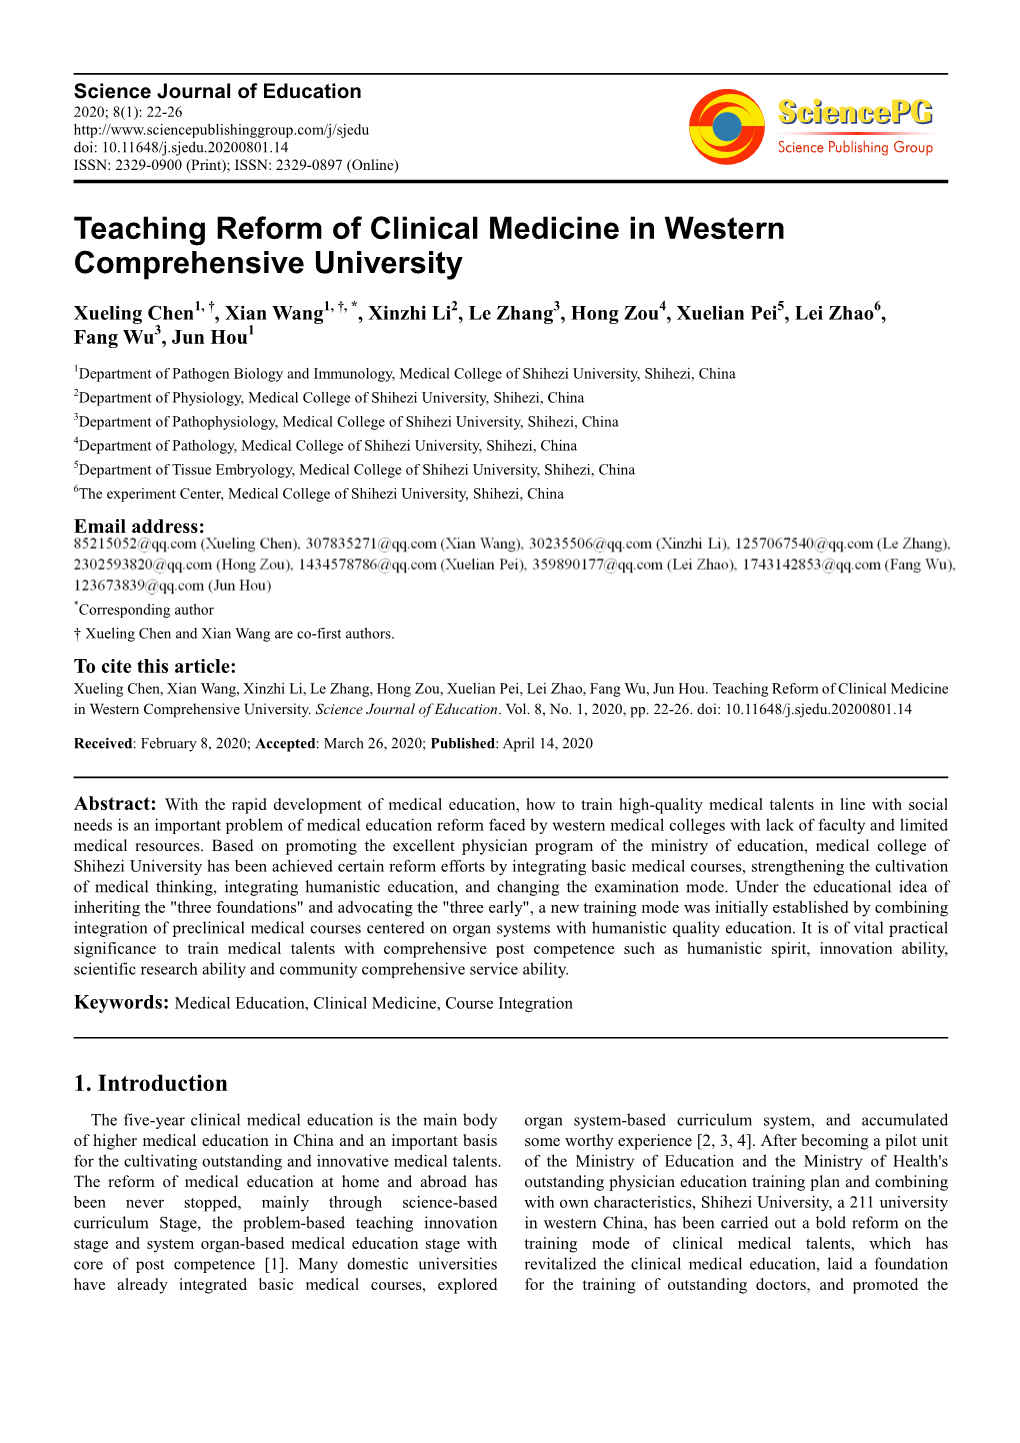 Teaching Reform of Clinical Medicine in Western Comprehensive University